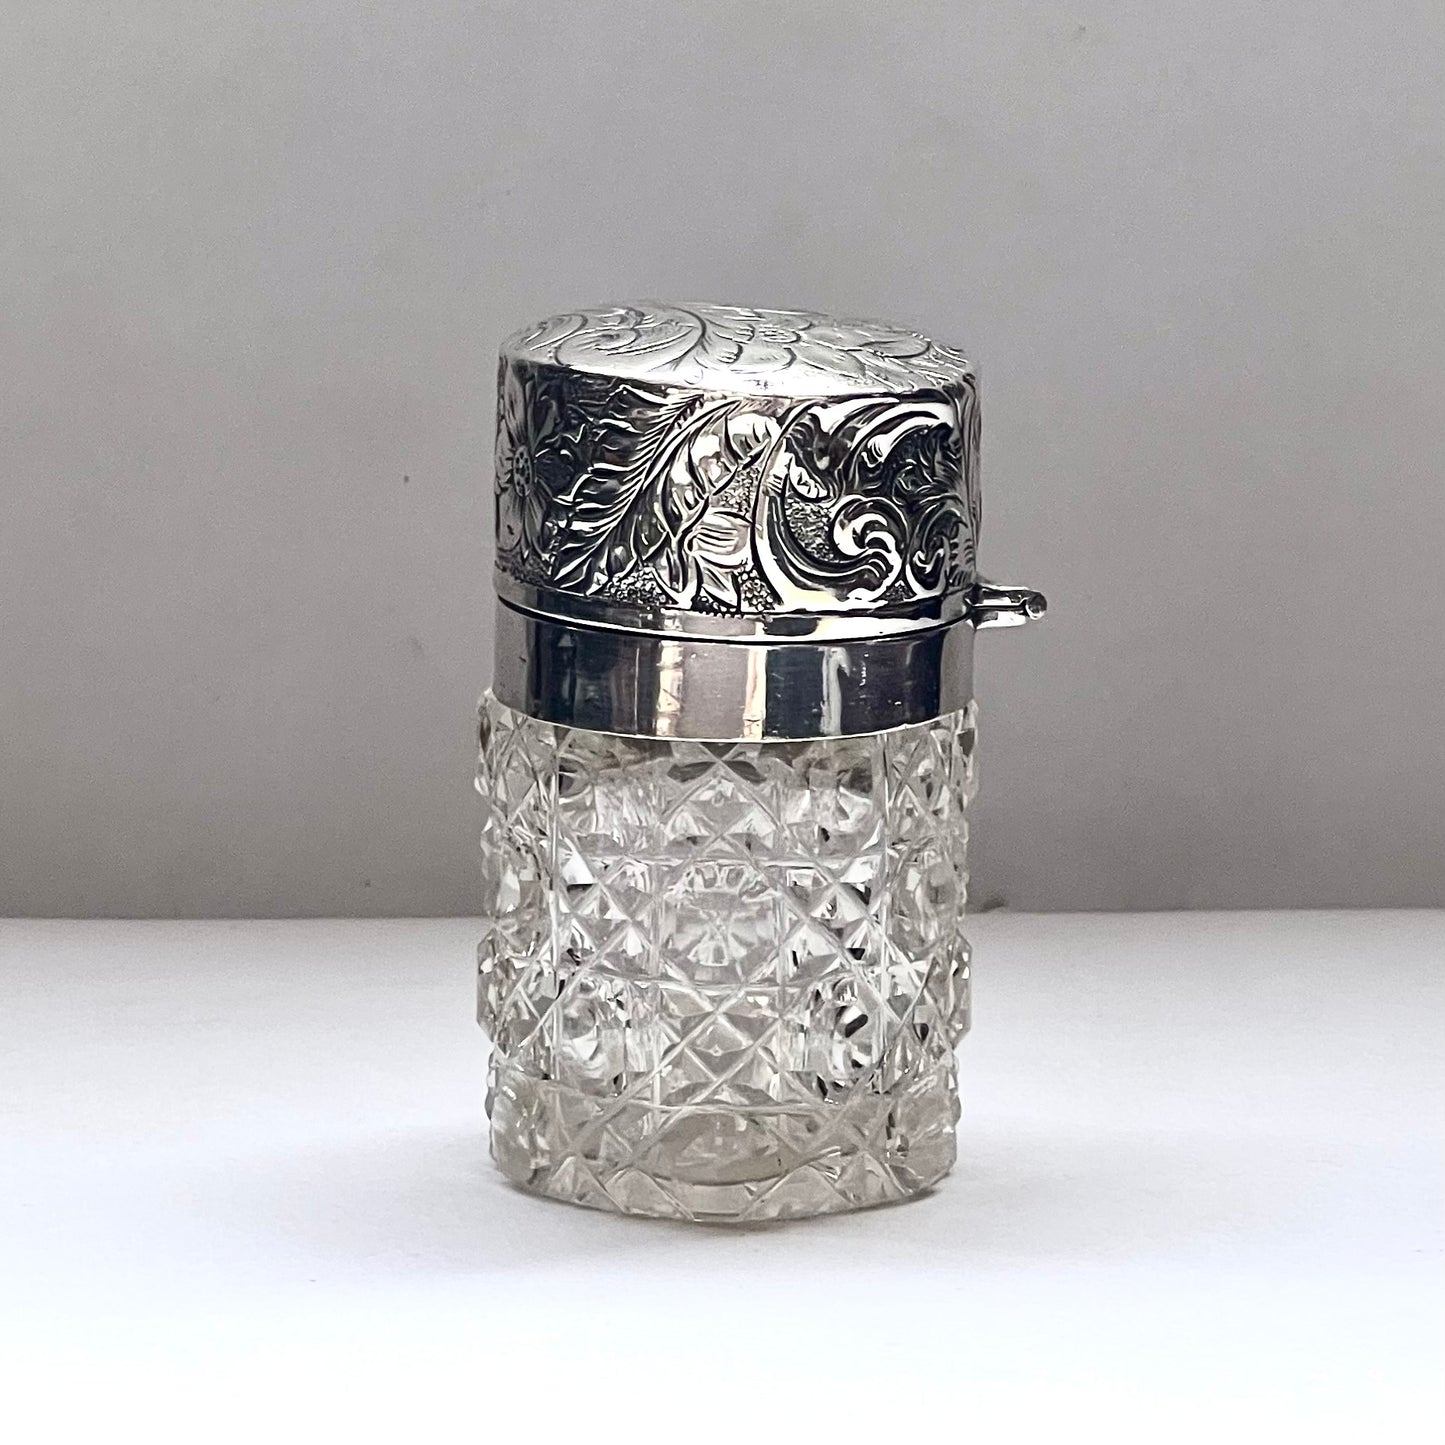 Antique Edwardian cut glass and sterling silver scent bottle, London 1910